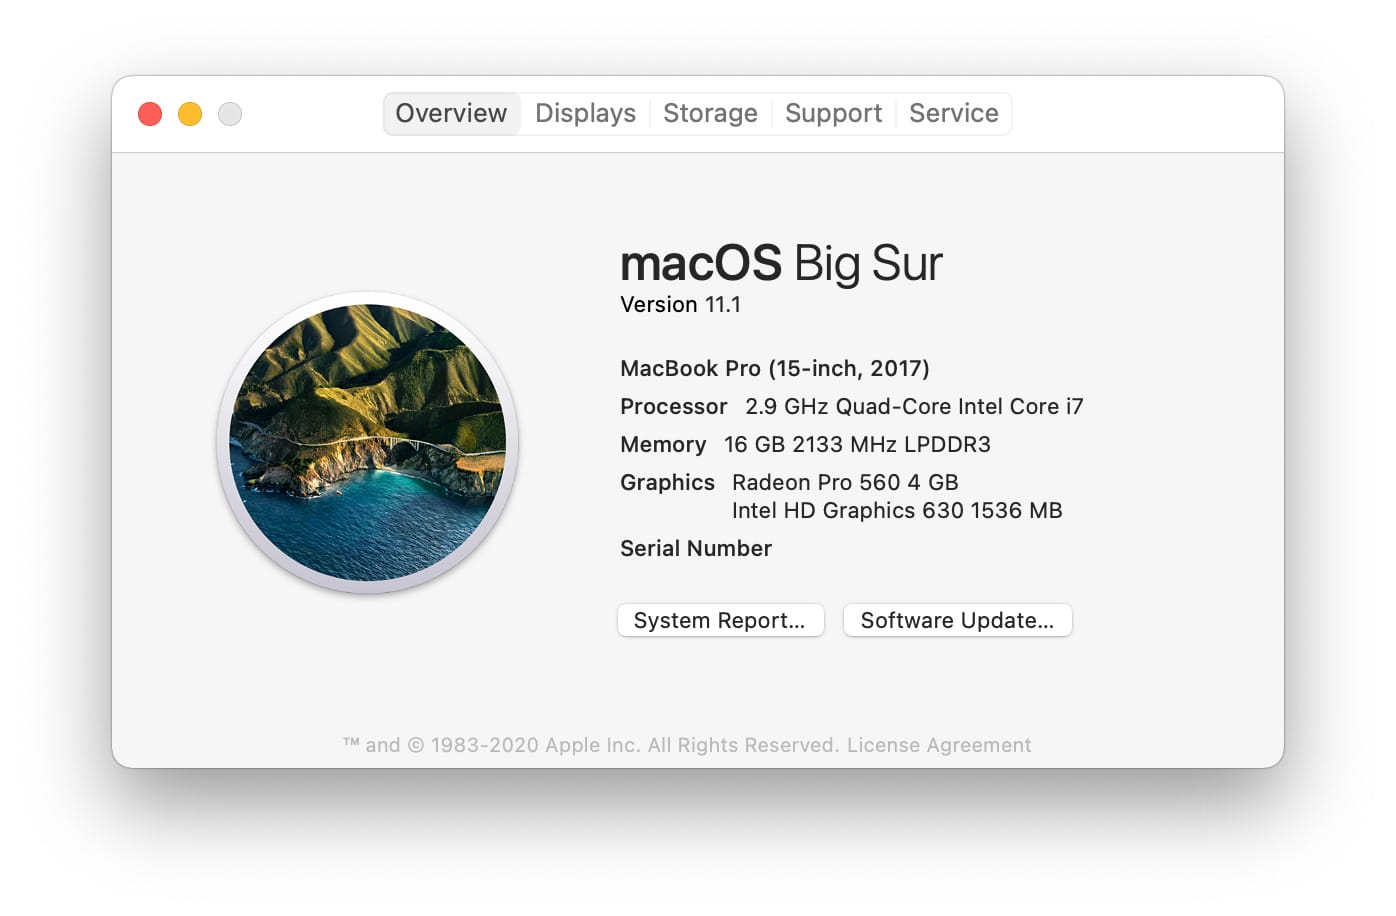 About this Mac: macOS Big Sur